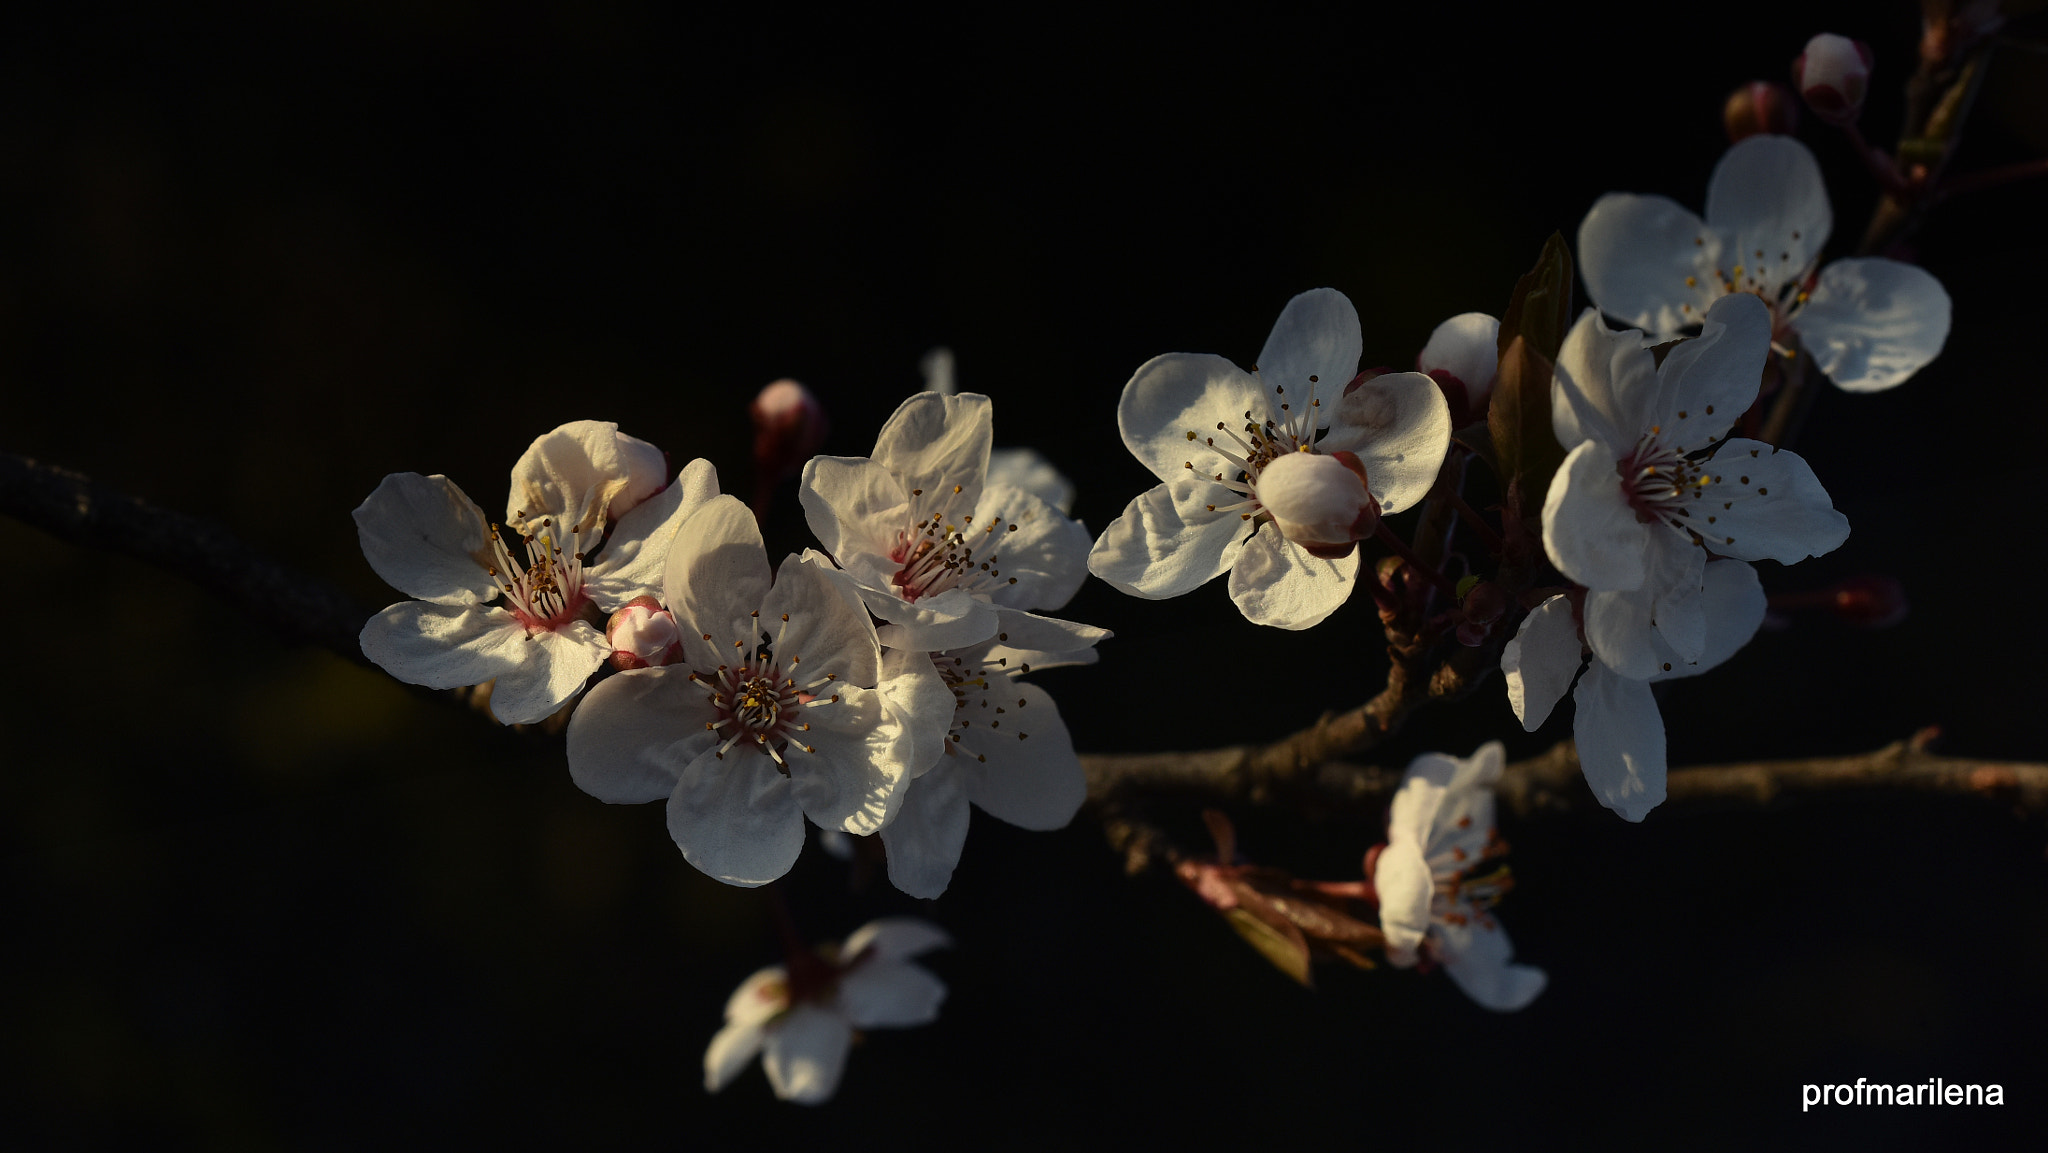 Nikon D810 sample photo. First blooming roadside tree, late afternoon photography